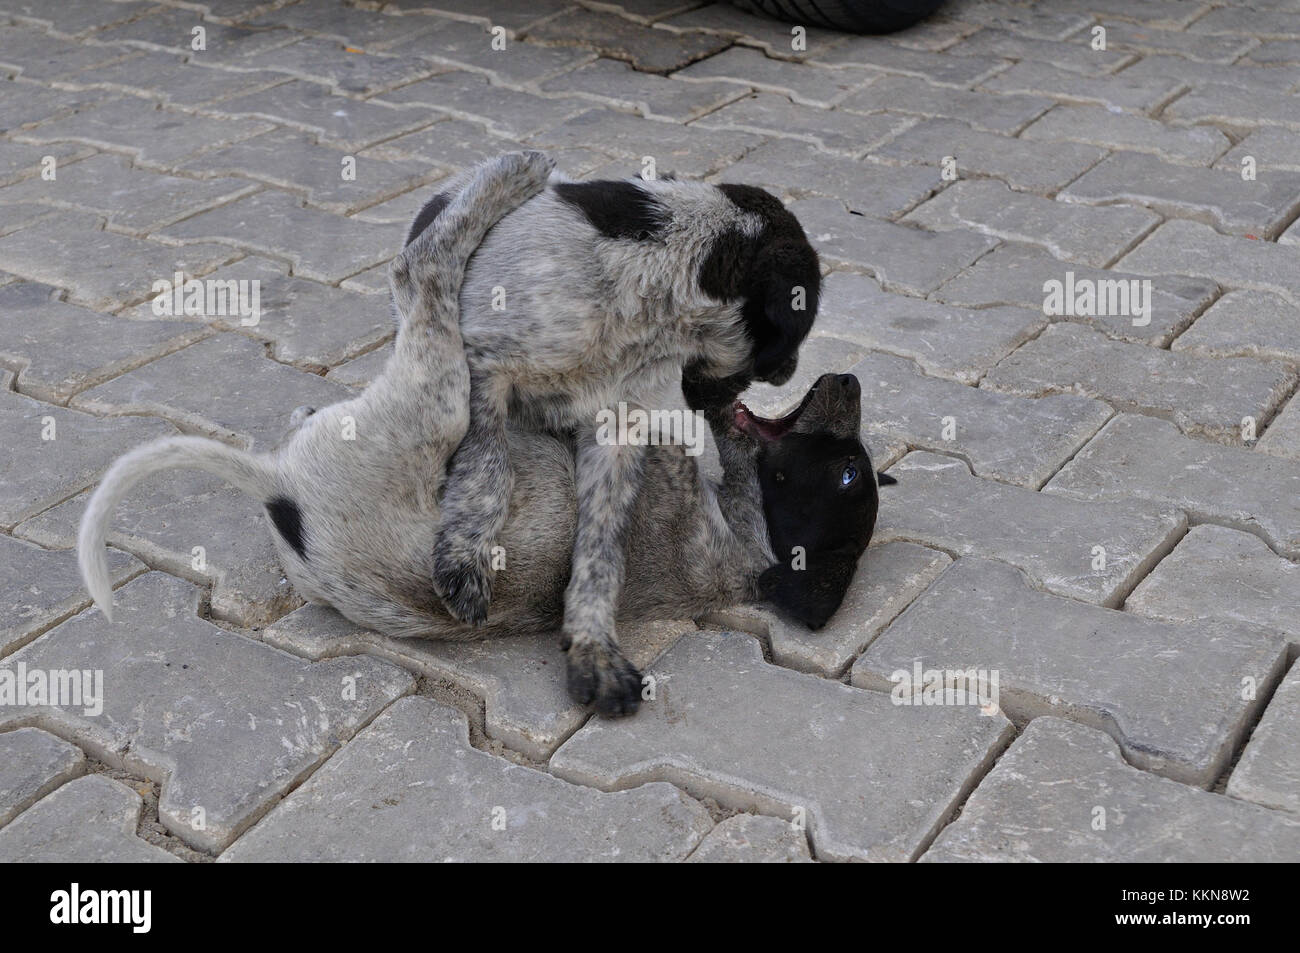 puppy sibling games Stock Photo